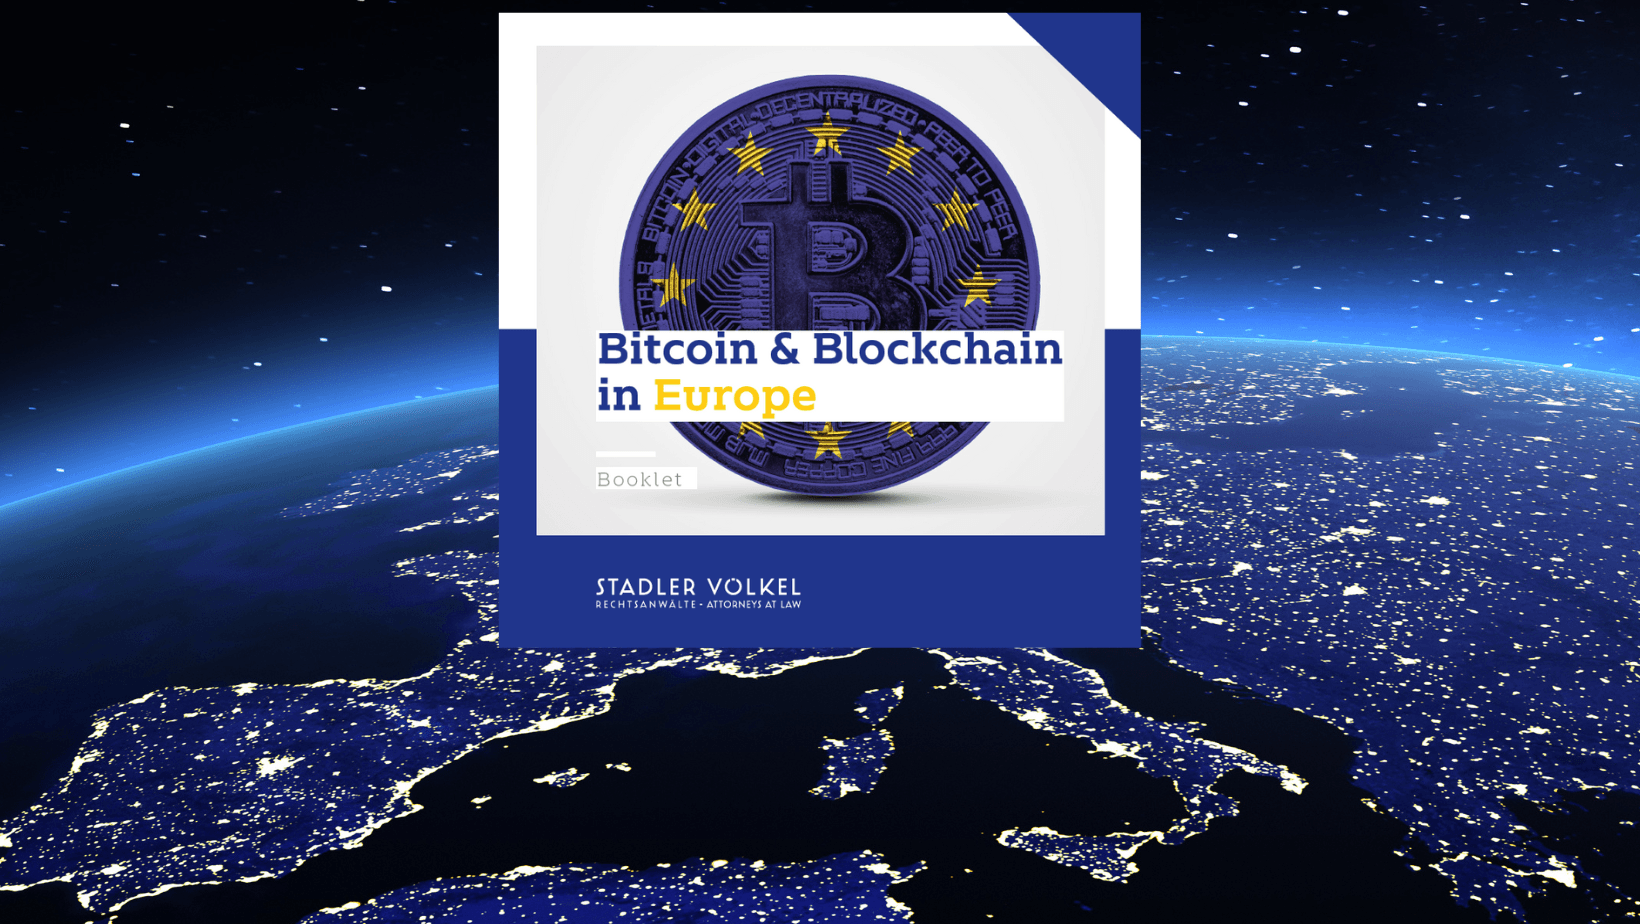 New booklet: Bitcoin & Blockchain in Europe